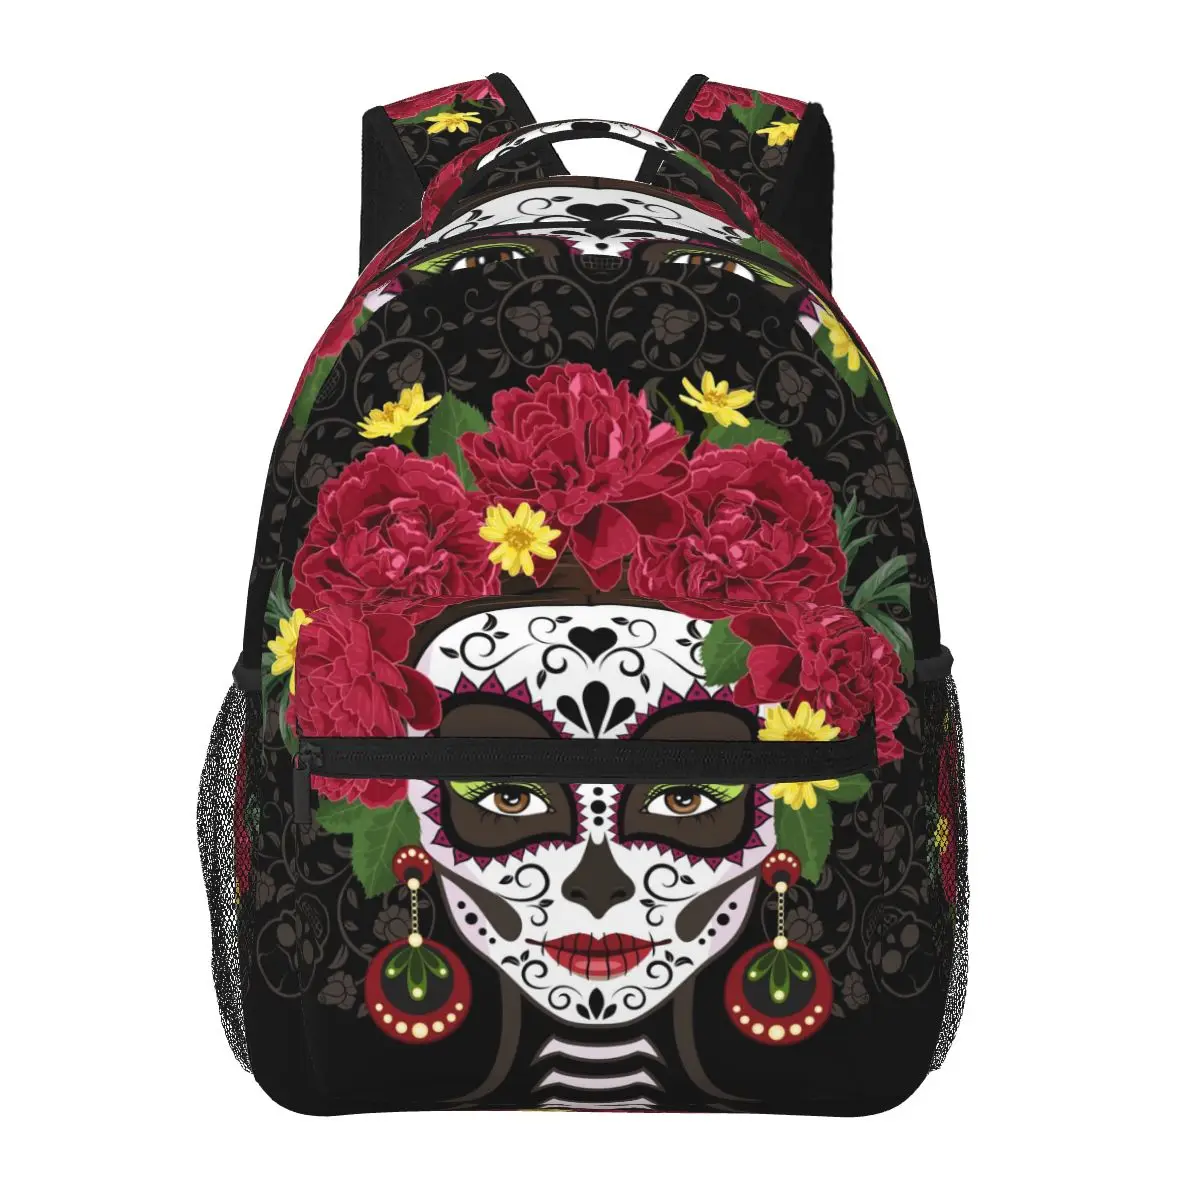 

Women's Backpack Santa Muerte With Peonies Calavera Catrina Day Of The Dead School Bag for Men Lady Casual School Backpack